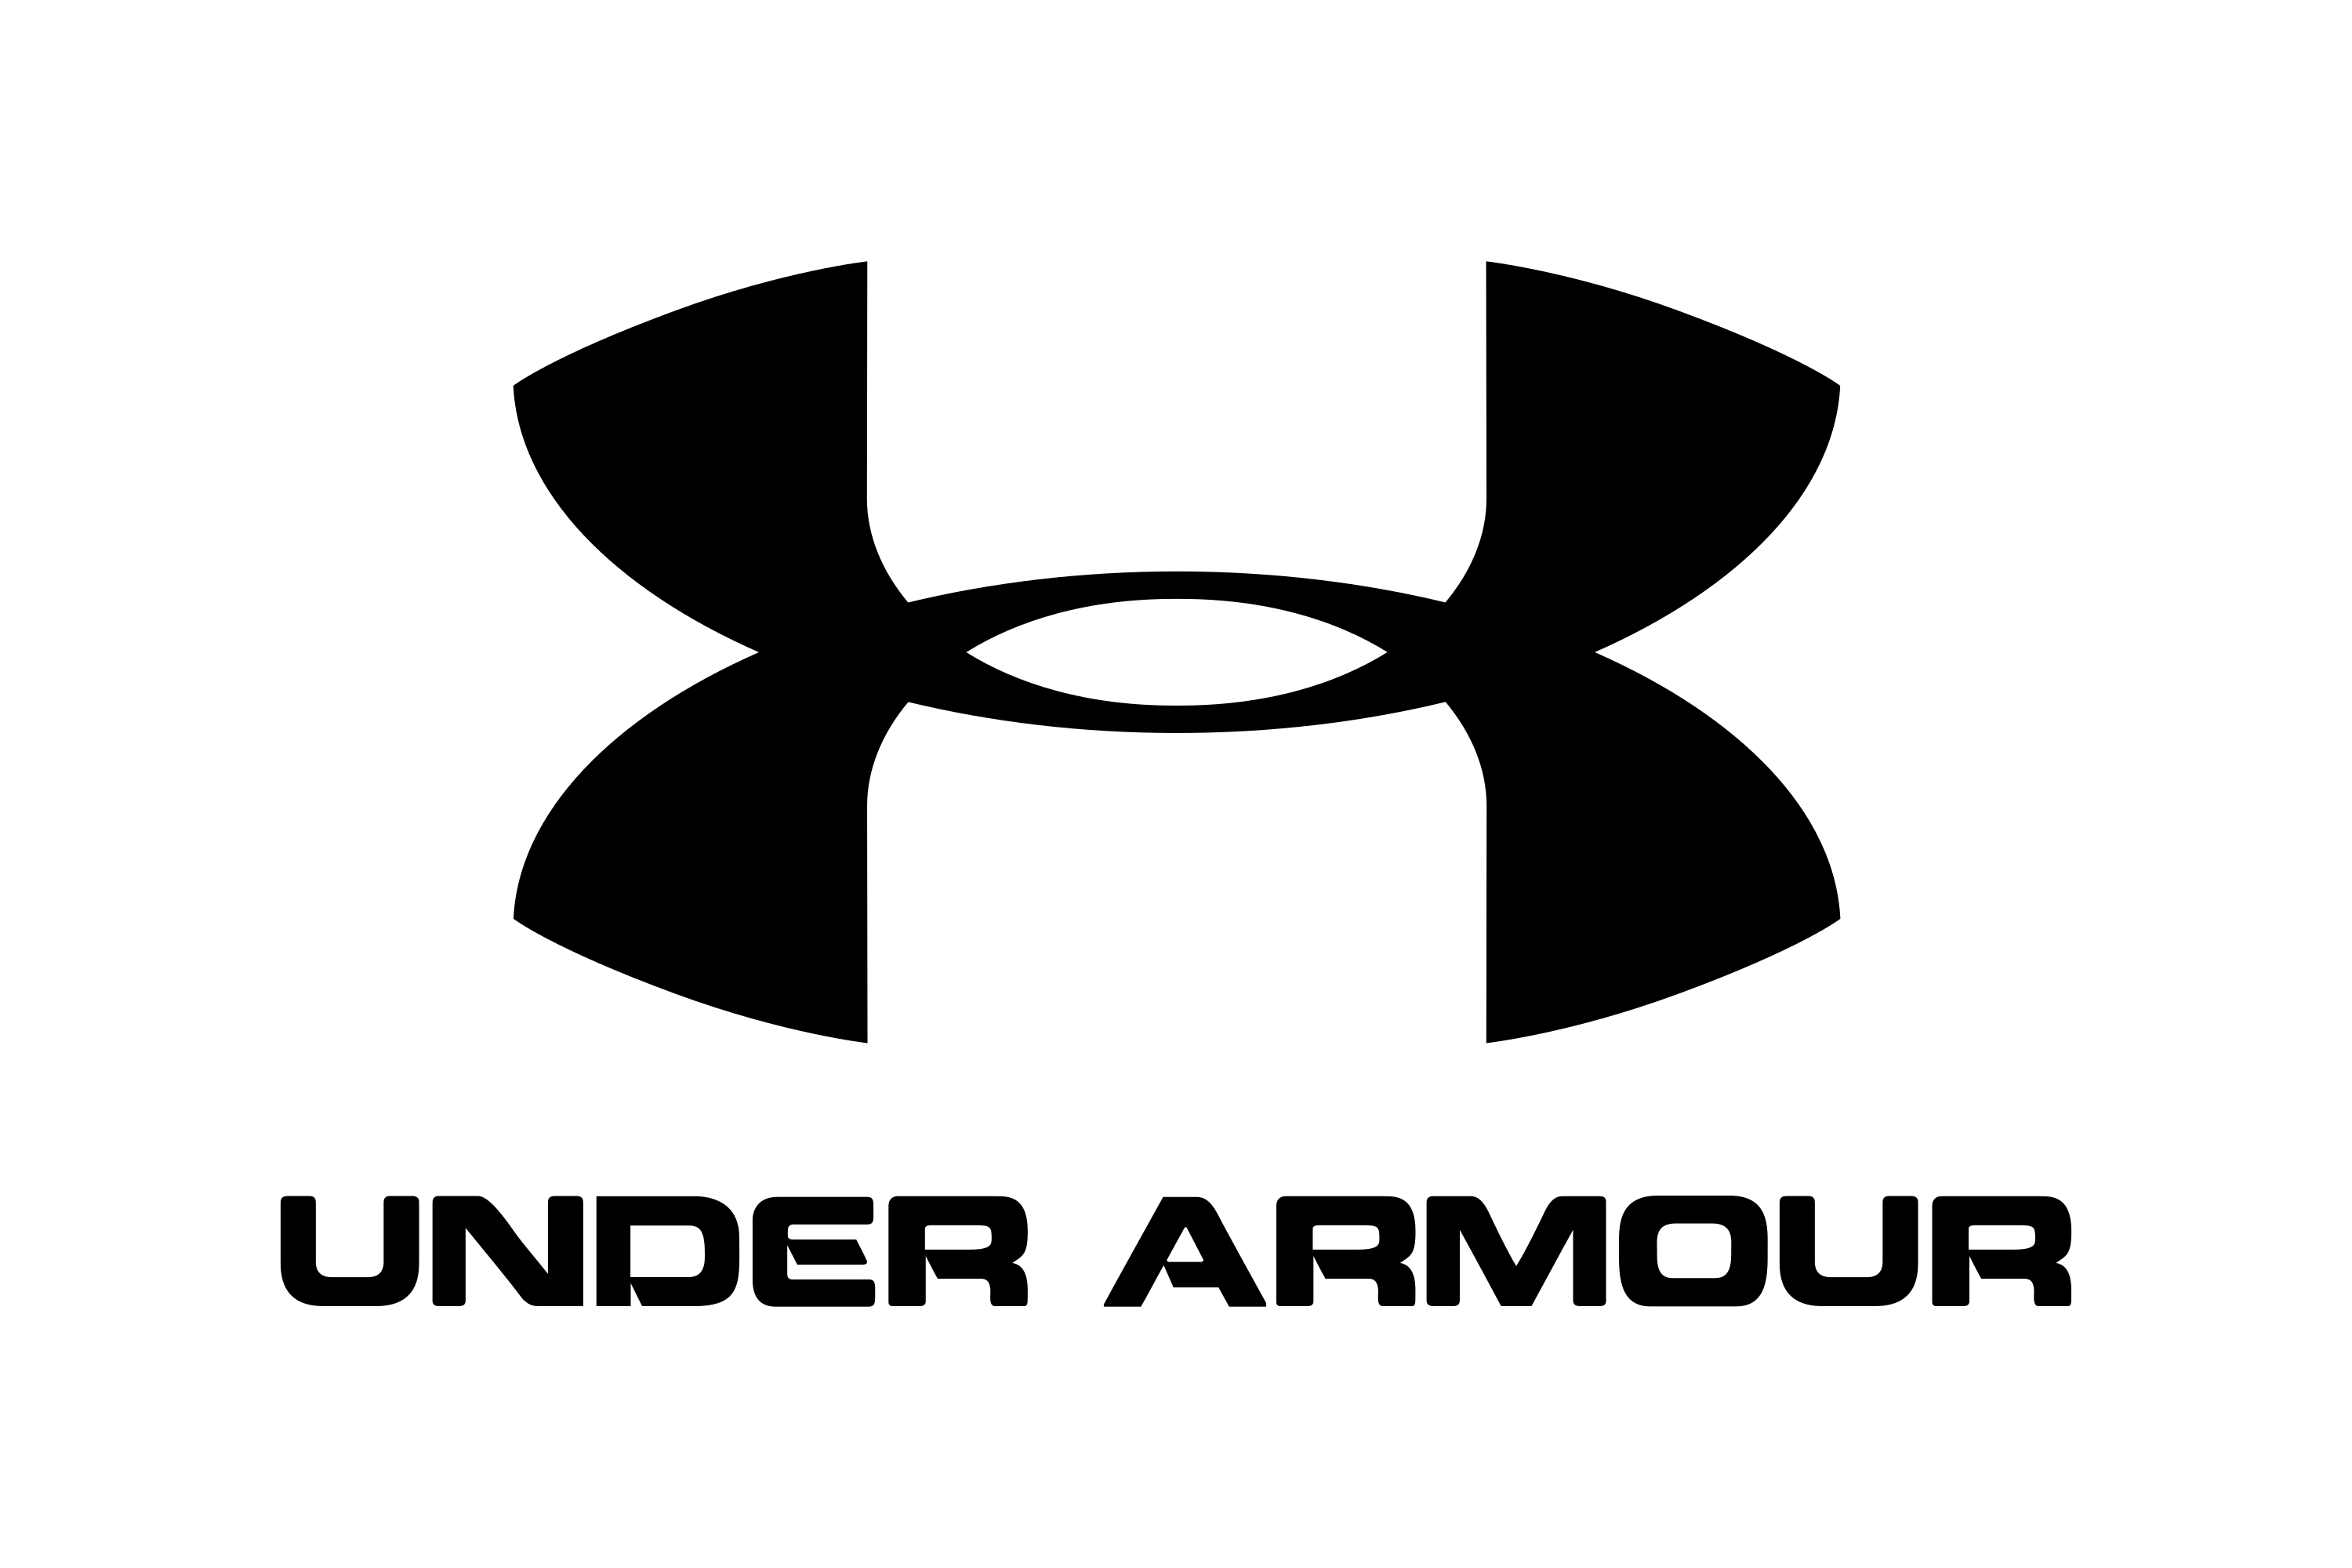 Download Under Armour Logo in SVG Vector or PNG File Format Logo.wine